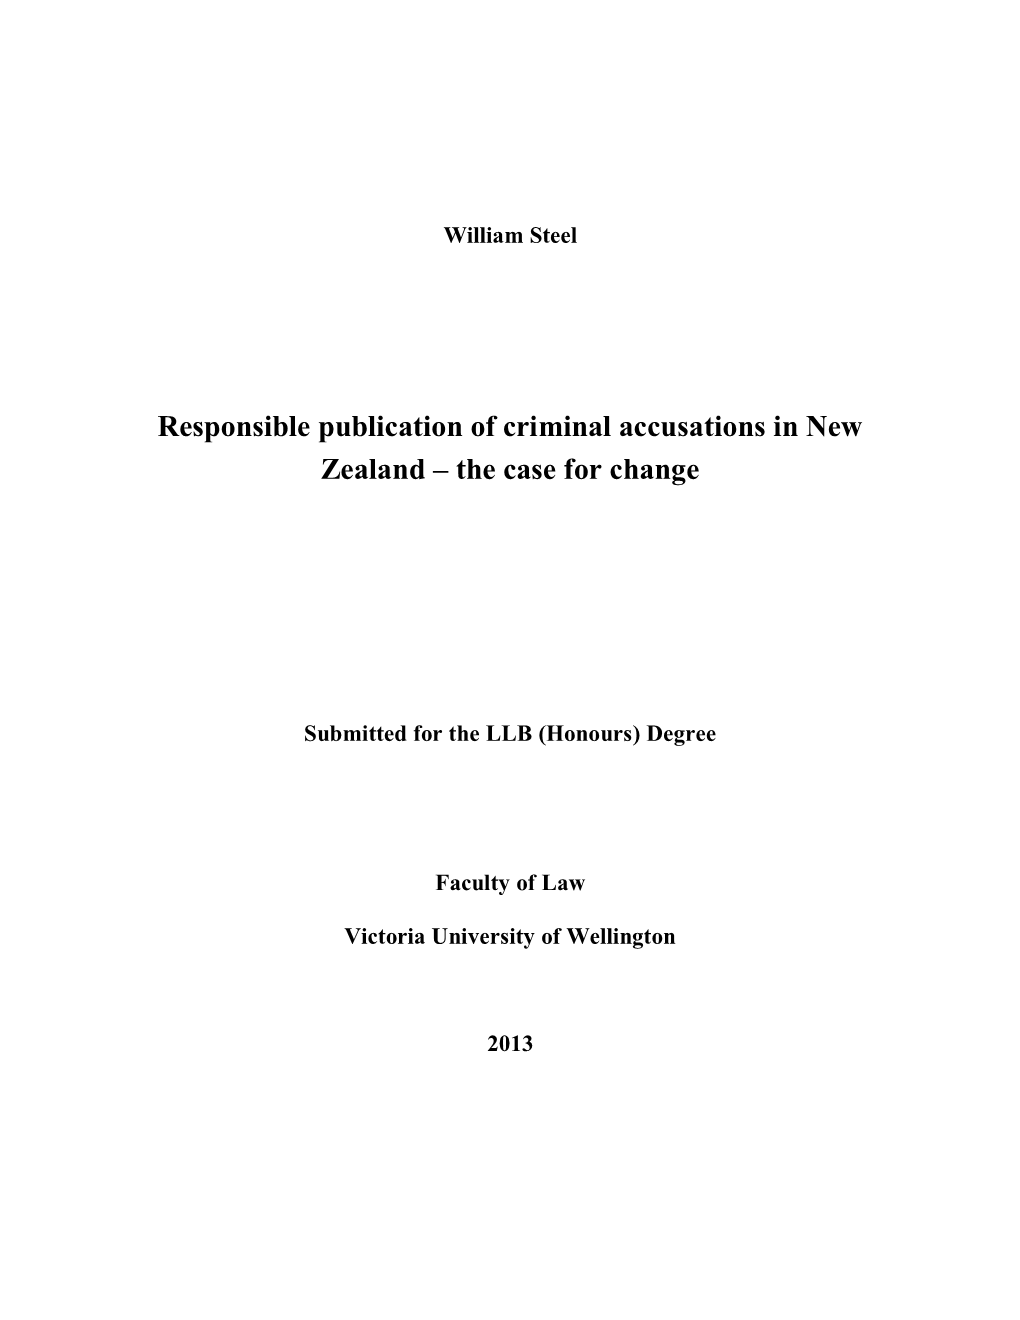 Responsible Publication of Criminal Accusations in New Zealand – the Case for Change